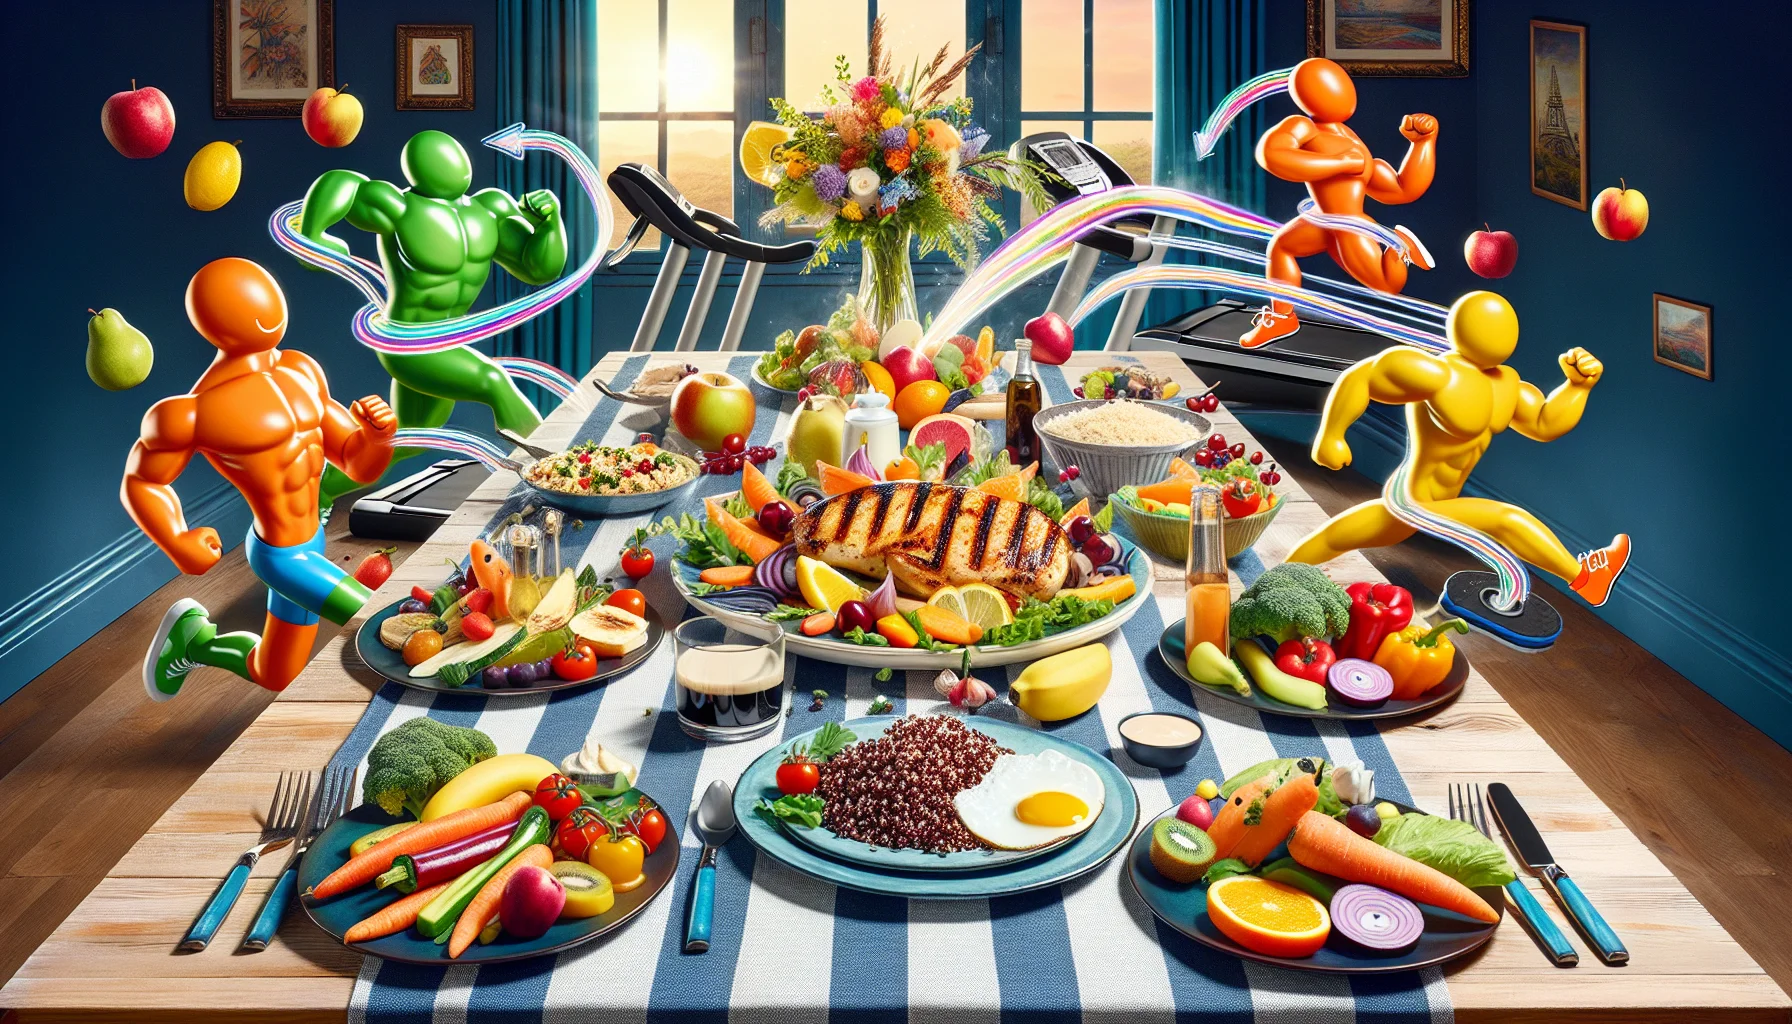 Generate a vibrant and humorous image illustrating an enticing scenario for a healthy dinner. Picture a colorful variety of nutritious foods (grilled chicken breast, steaming quinoa, roasted vegetables, and fresh fruits) laid out on a beautifully arranged dining table. In the scenario, humorous cartoon characters representing different types of exercise equipment (a treadmill, a yoga mat, dumbbells) are playfully trying to grab or reach for the food on the table. The overall mood of the image should be energetic and inviting, promoting the idea of 'Fueling your fitness with taste'